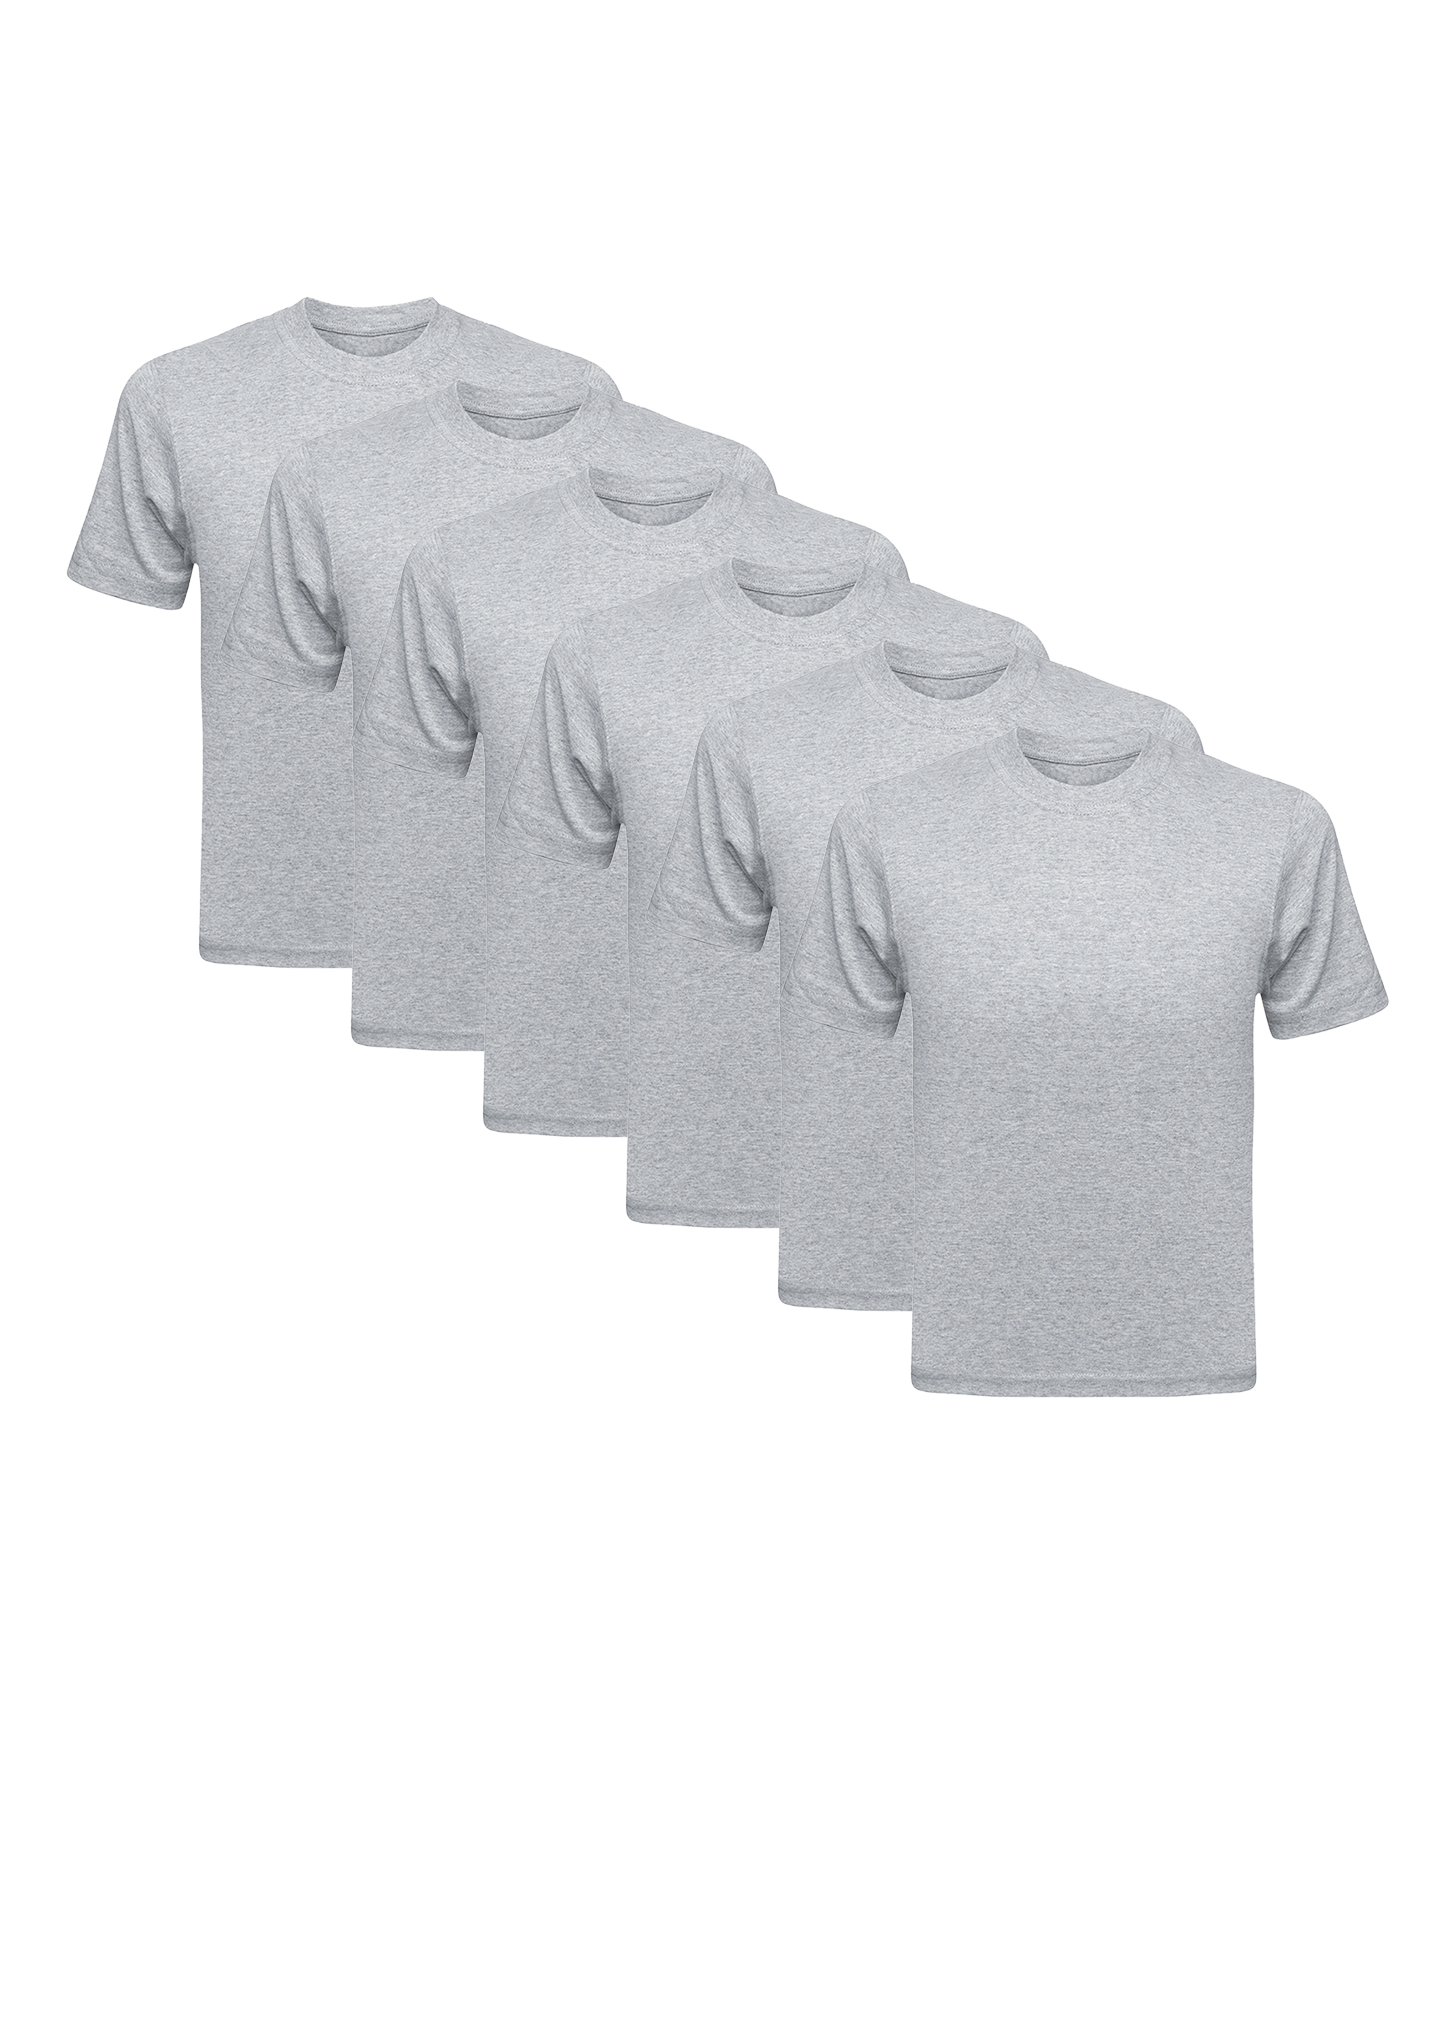 Gray Combed Cotton T-Shirt 6-Pack